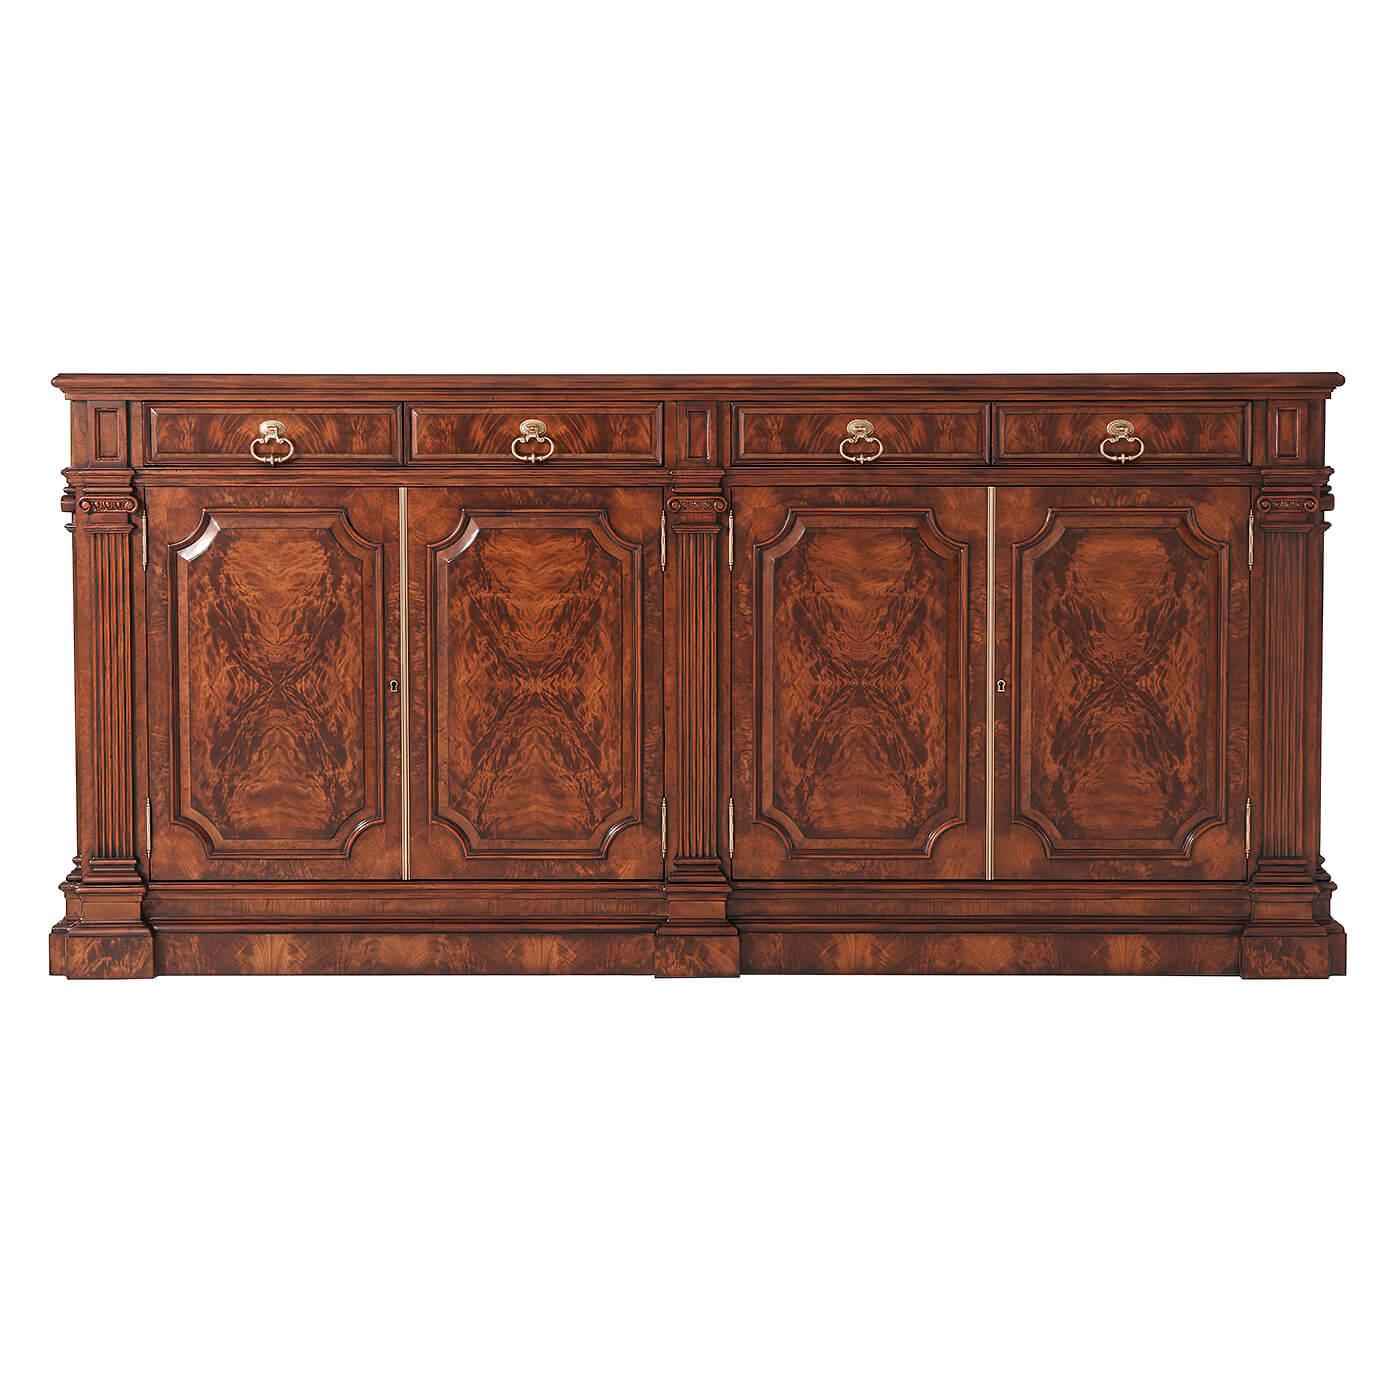 A George III style mahogany and flame veneered sideboard, the rectangular molded edge top above four frieze drawers and four-paneled doors enclosing two adjustable shelves, between fluted column uprights, on a plinth base.

Dimensions: 90.75